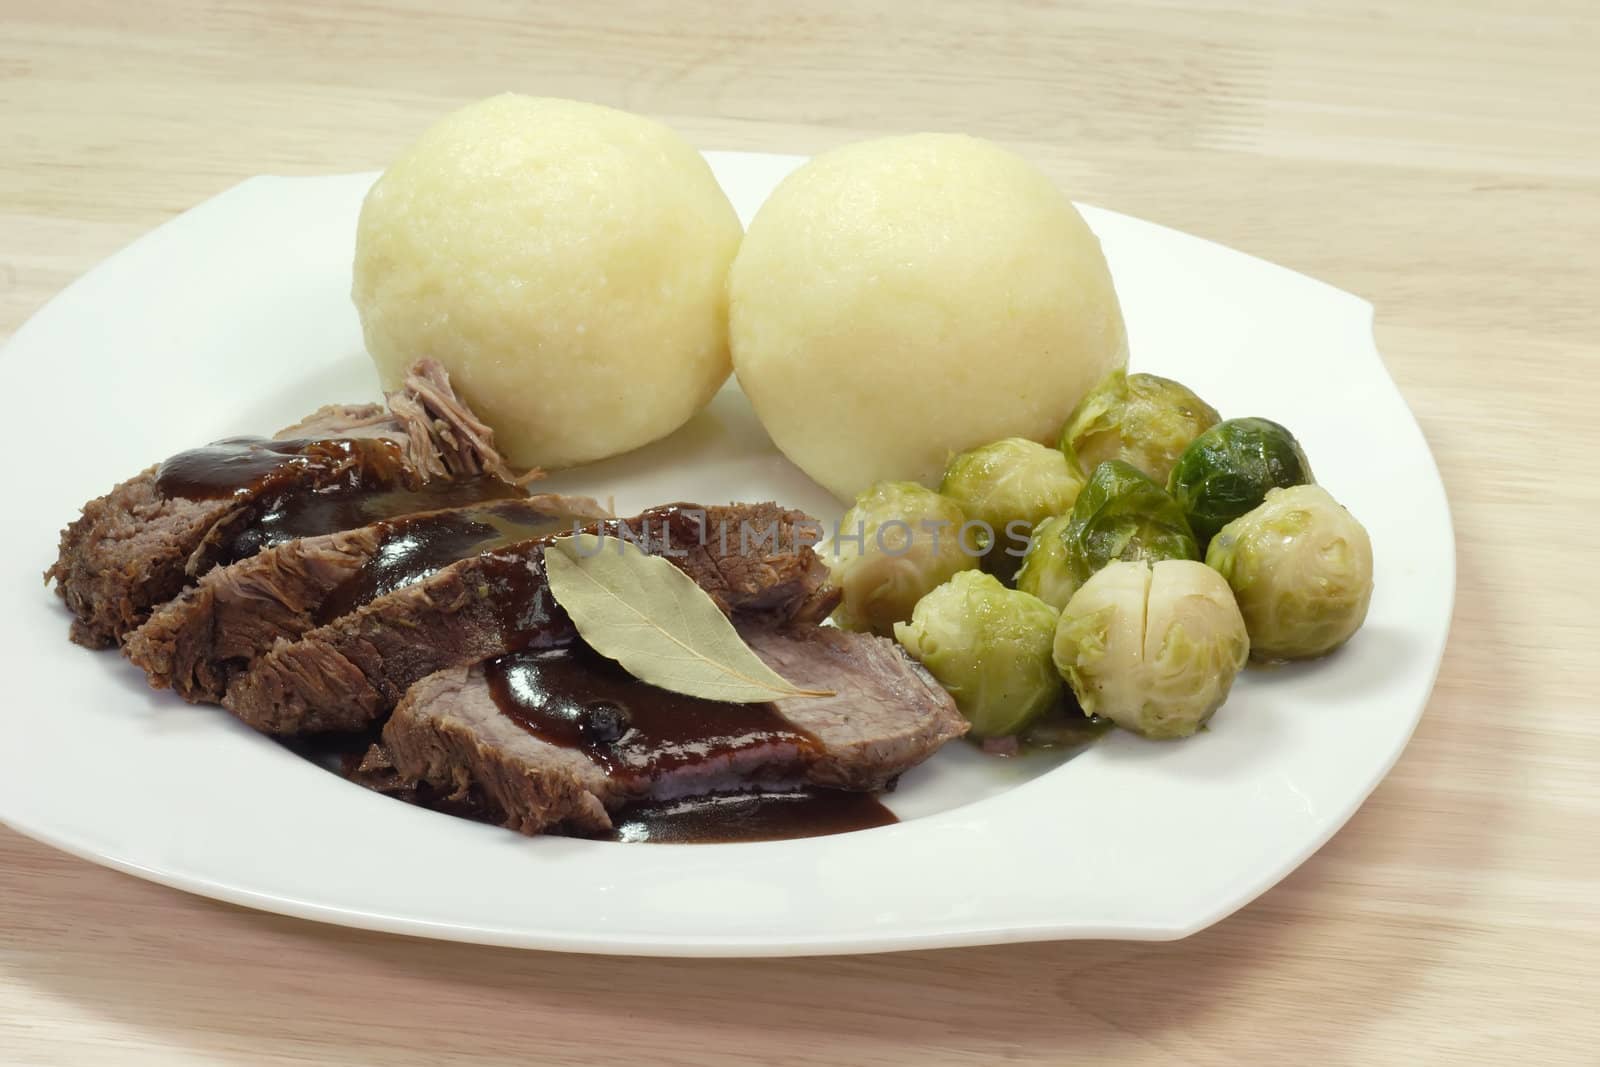 Roasted beef with potatoe dumbling and brussel sprouts